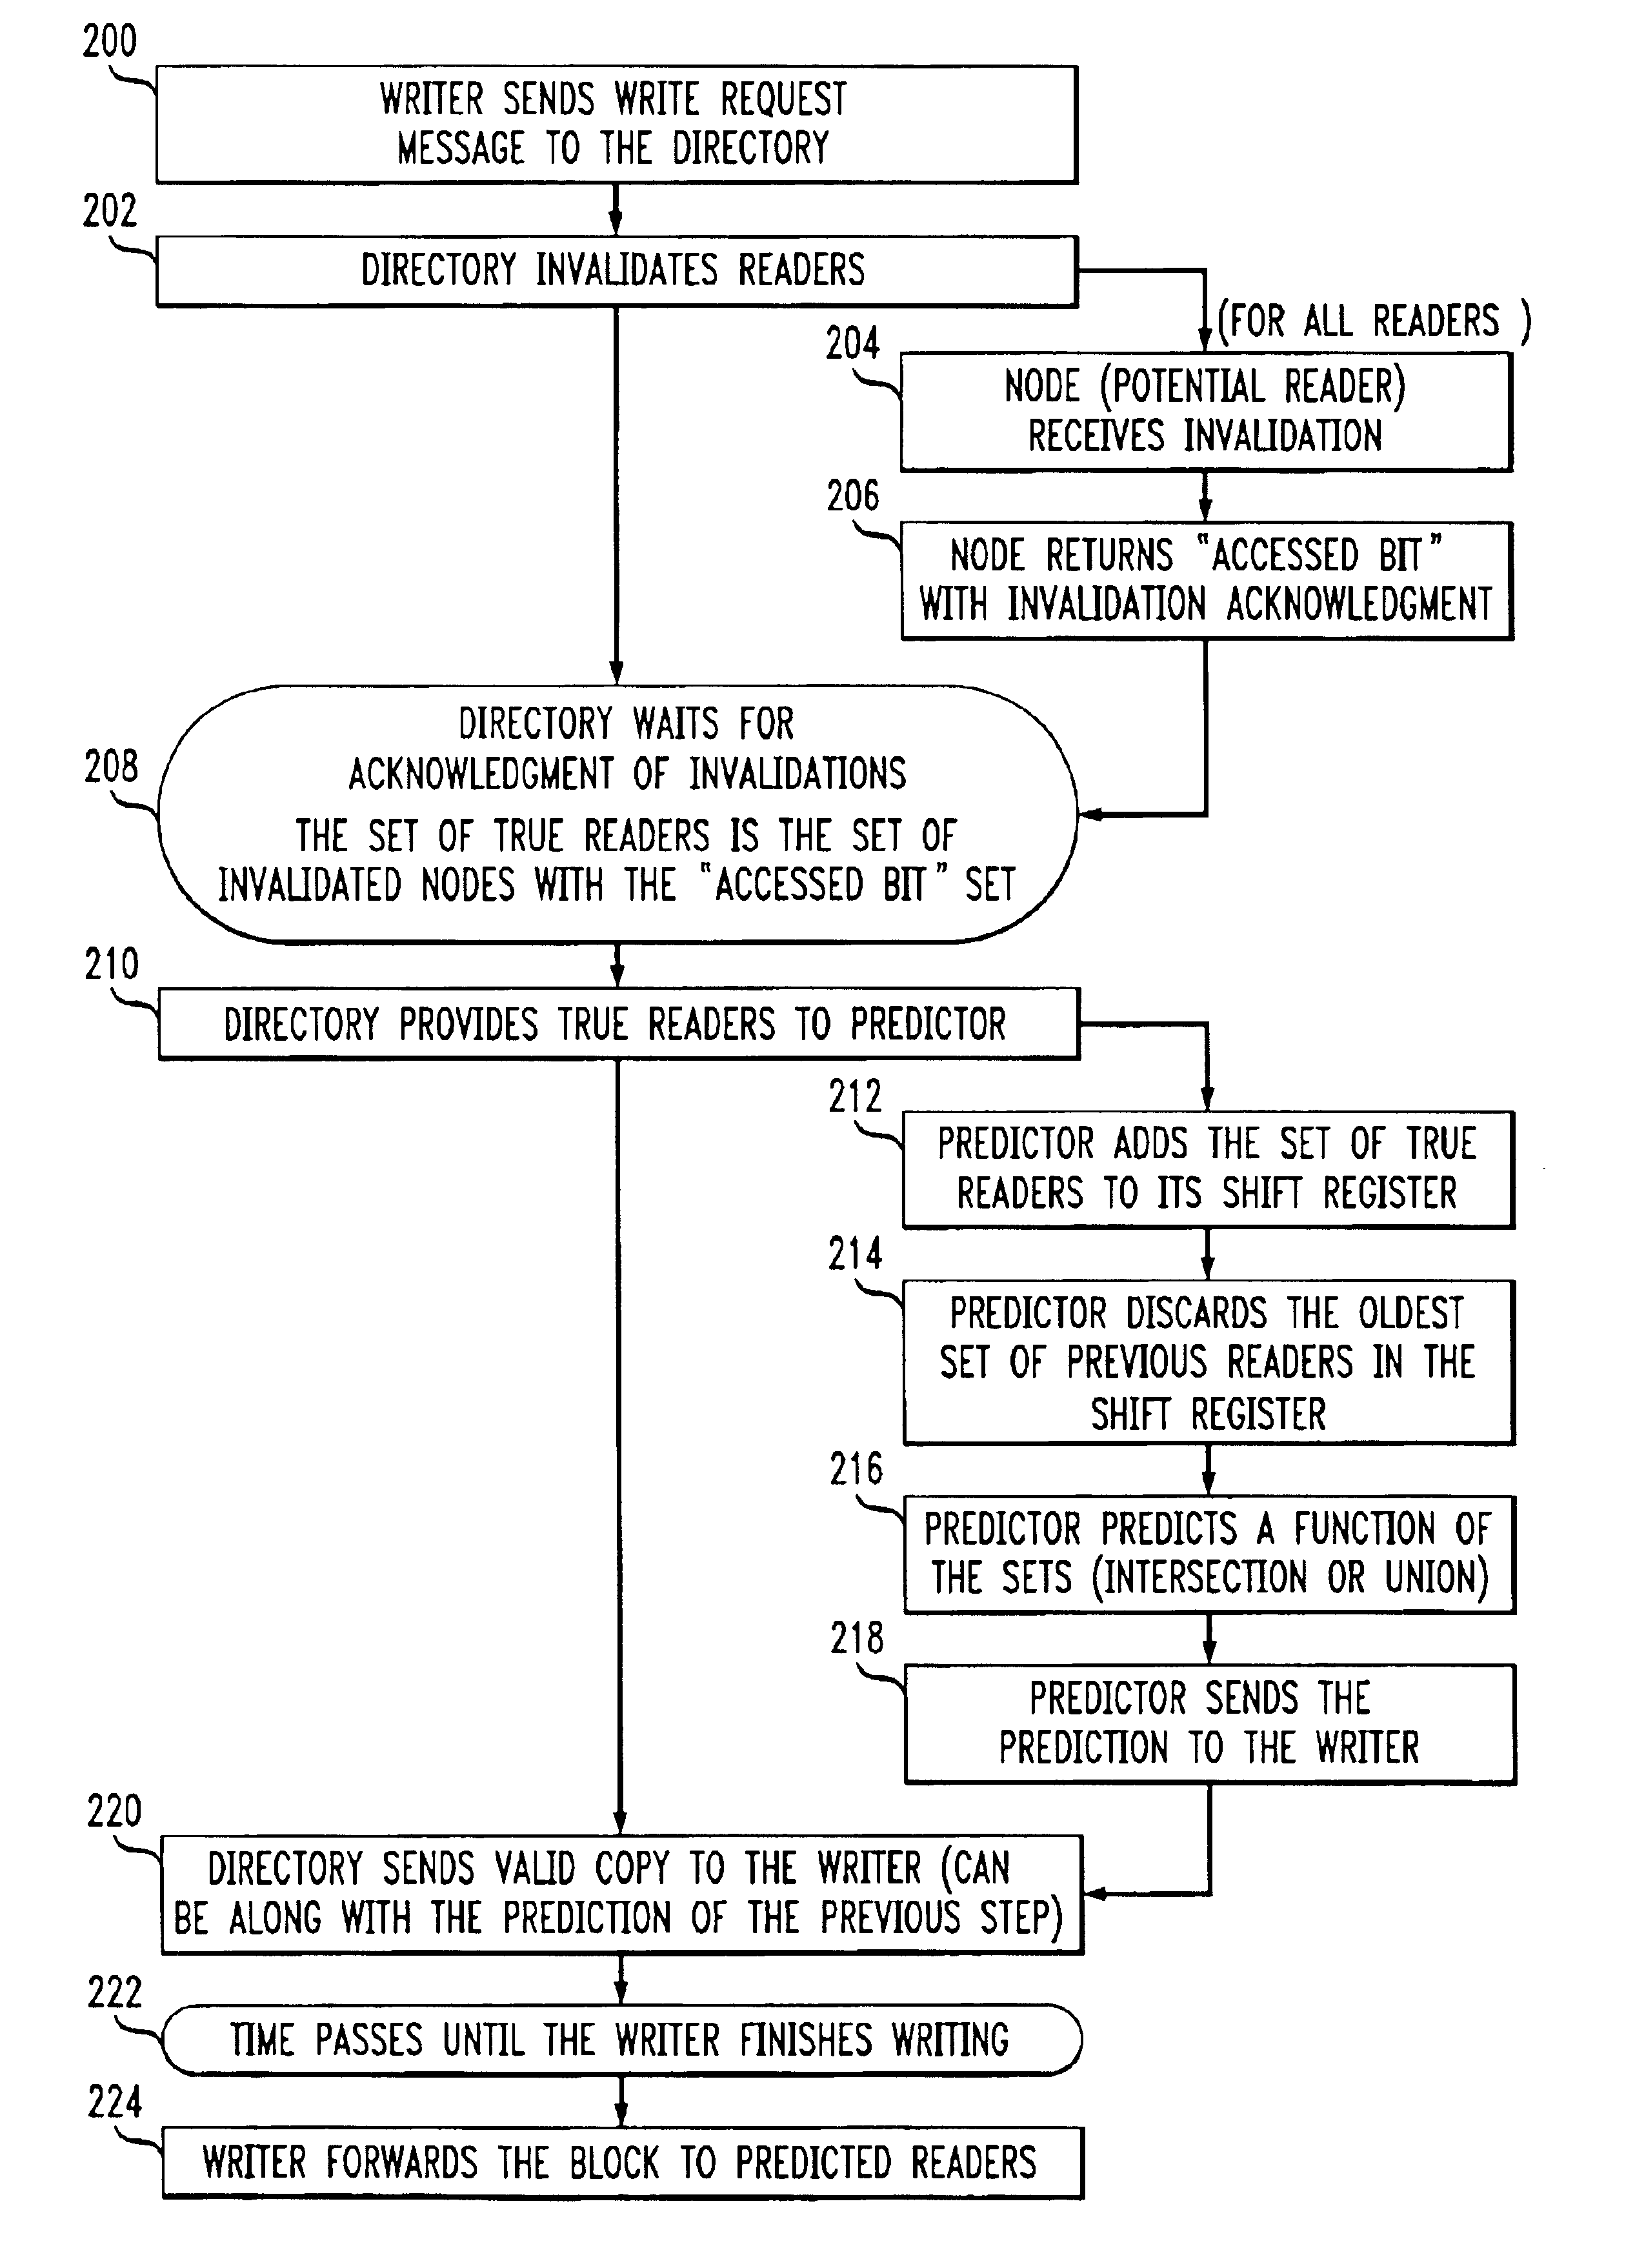 Directory-based prediction methods and apparatus for shared-memory multiprocessor systems